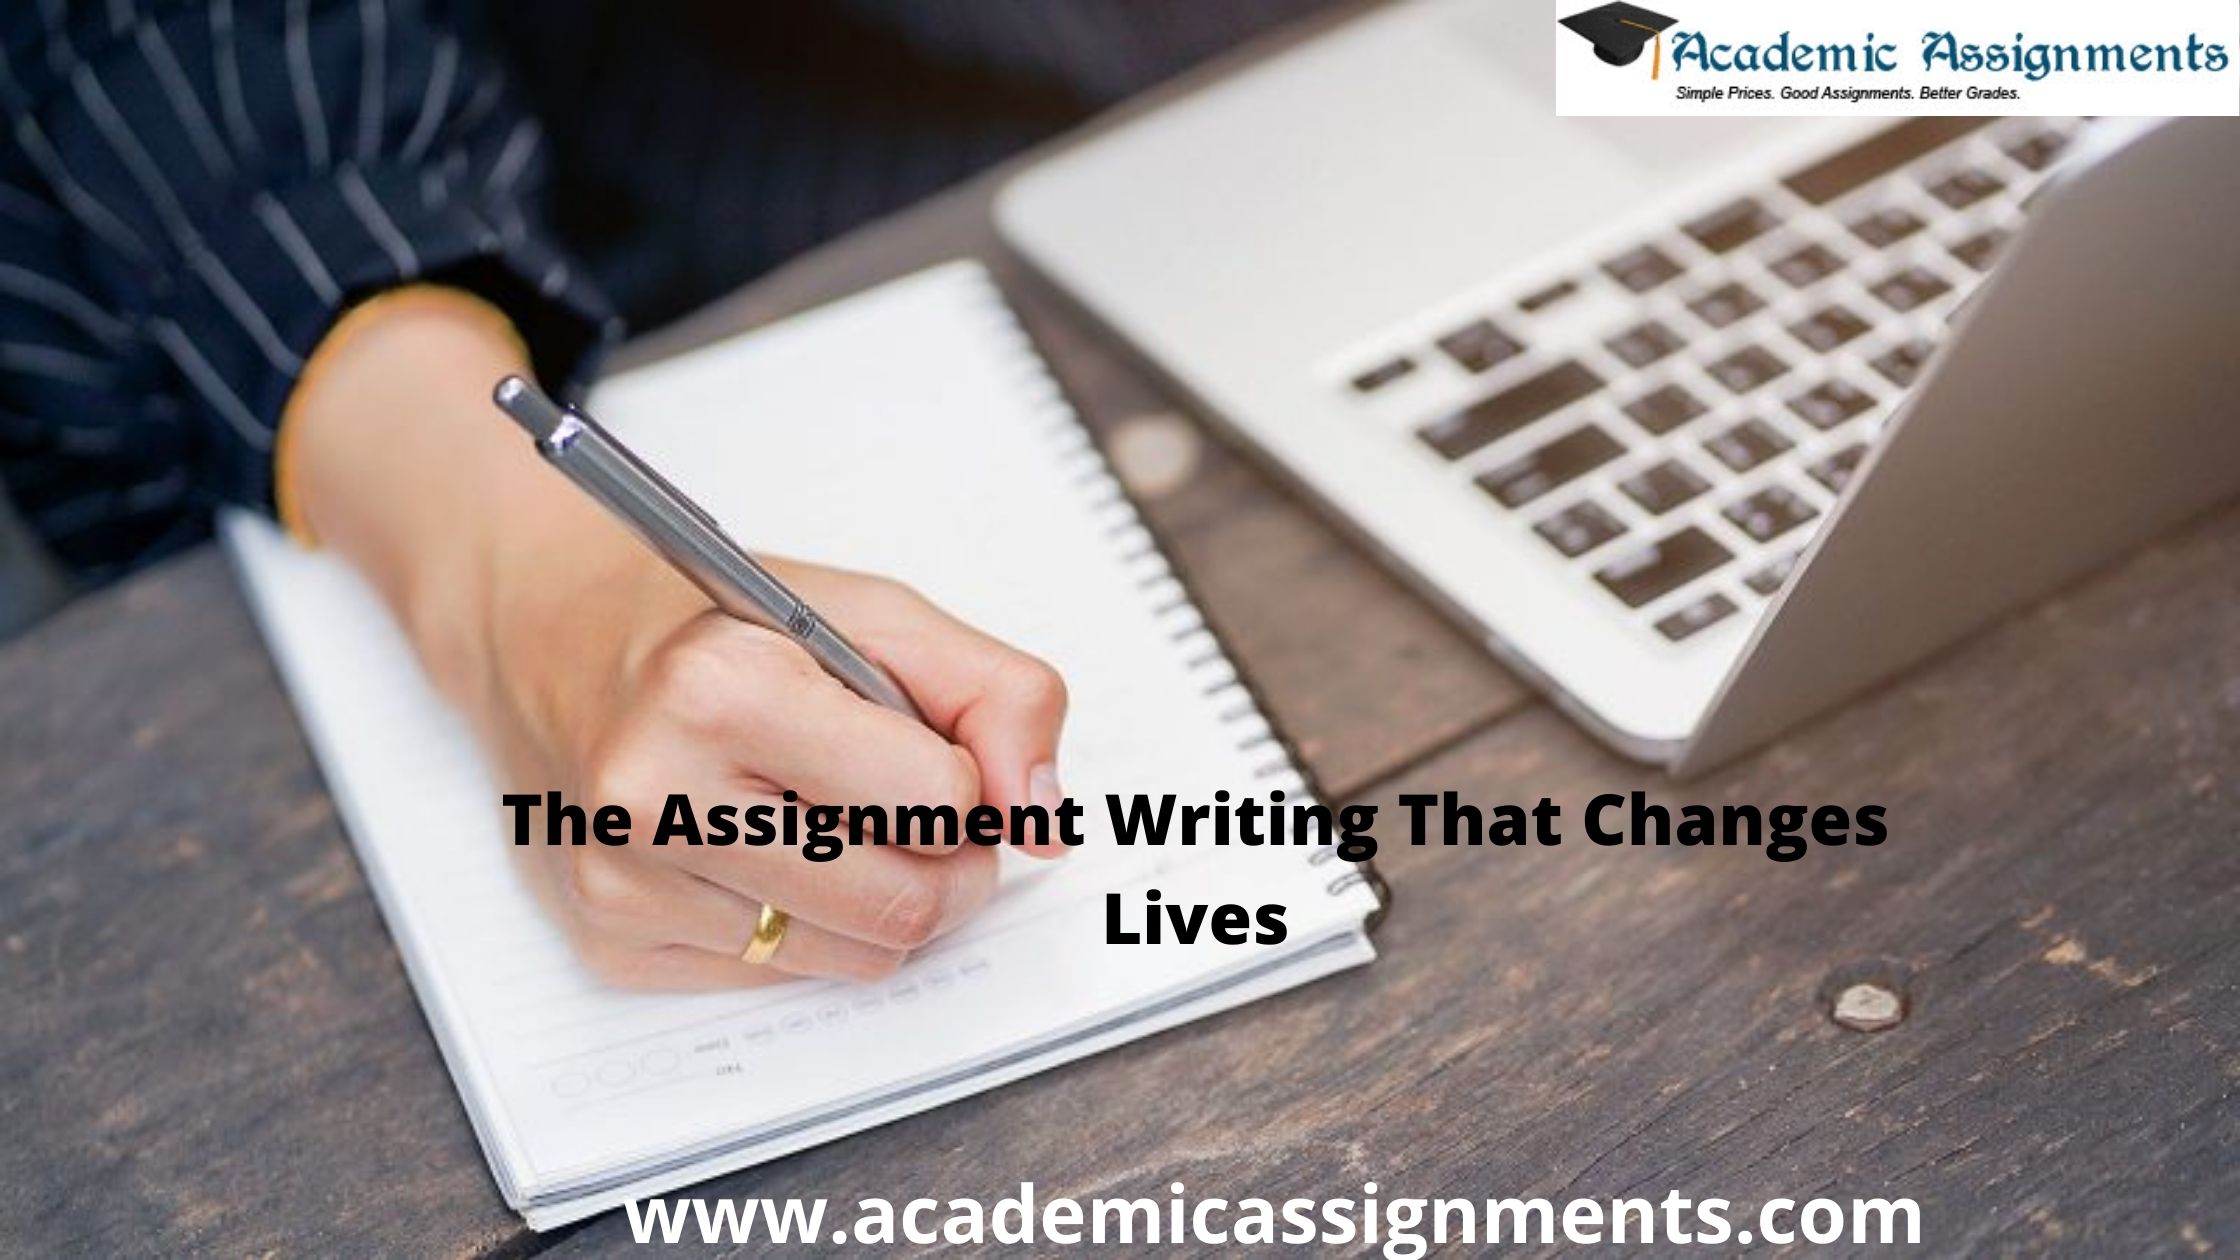 The Assignment Writing That Changes Lives